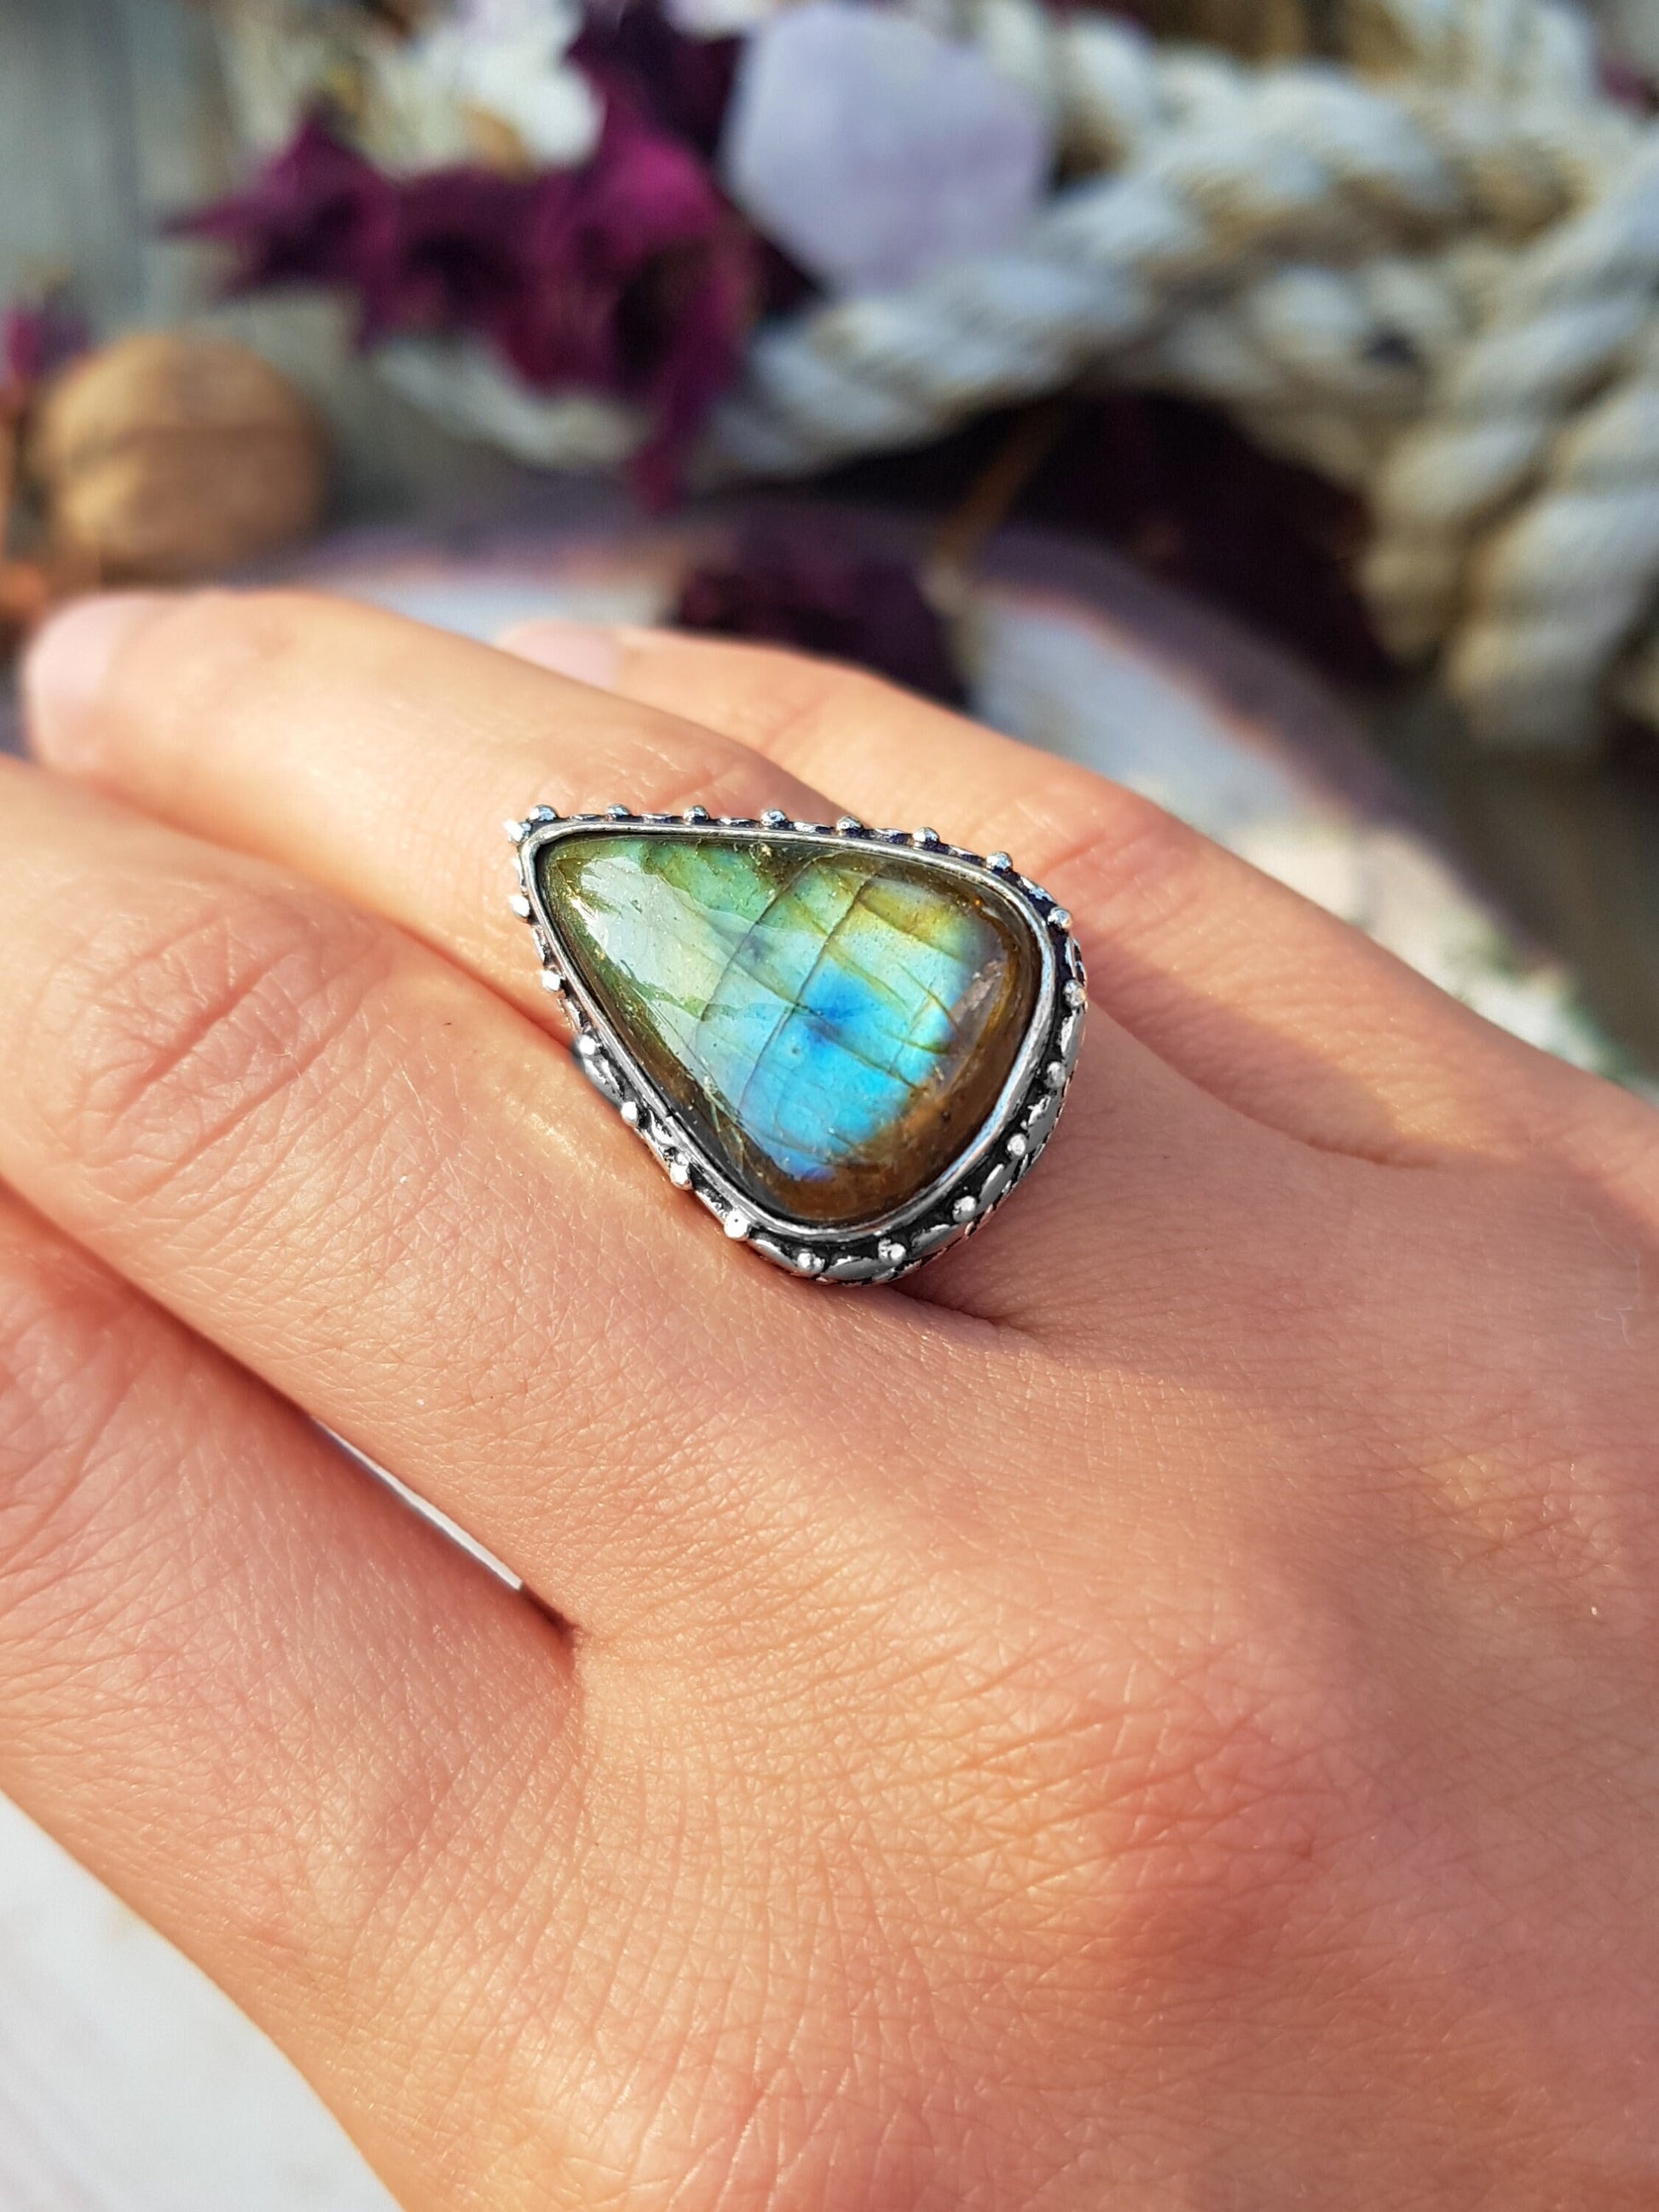 Labradorite Gemstone Ring In Sterling Silver Size US 7 1/2 Statement Ring Crystal Ring Boho Rings Gypsy Jewelry Unique Gift